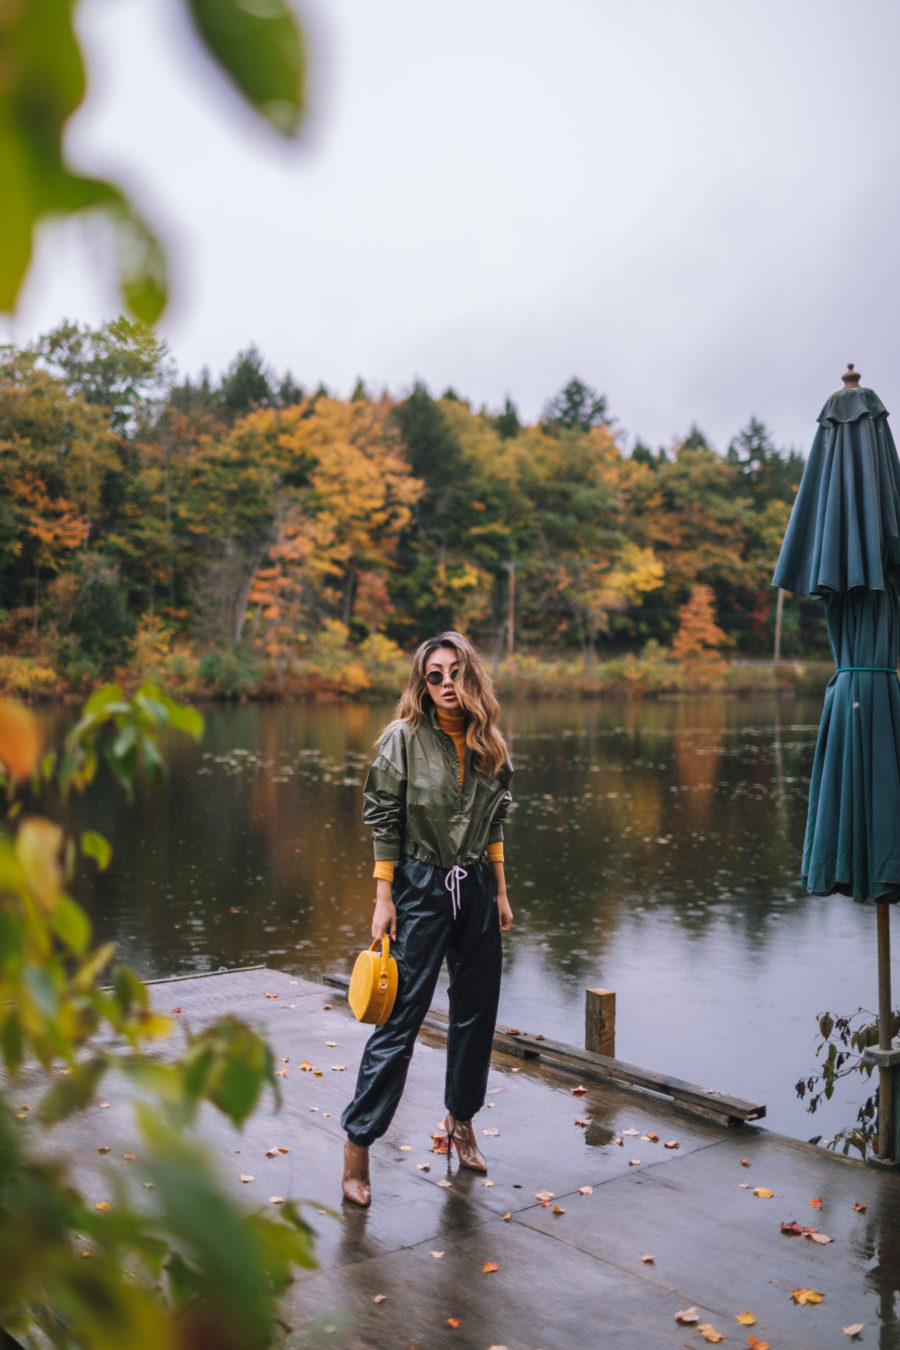 fashion blogger jessica wang wearing joggers and windbreaker while enjoying fun fall activities with her family // Jessica Wang - Notjessfashion.com